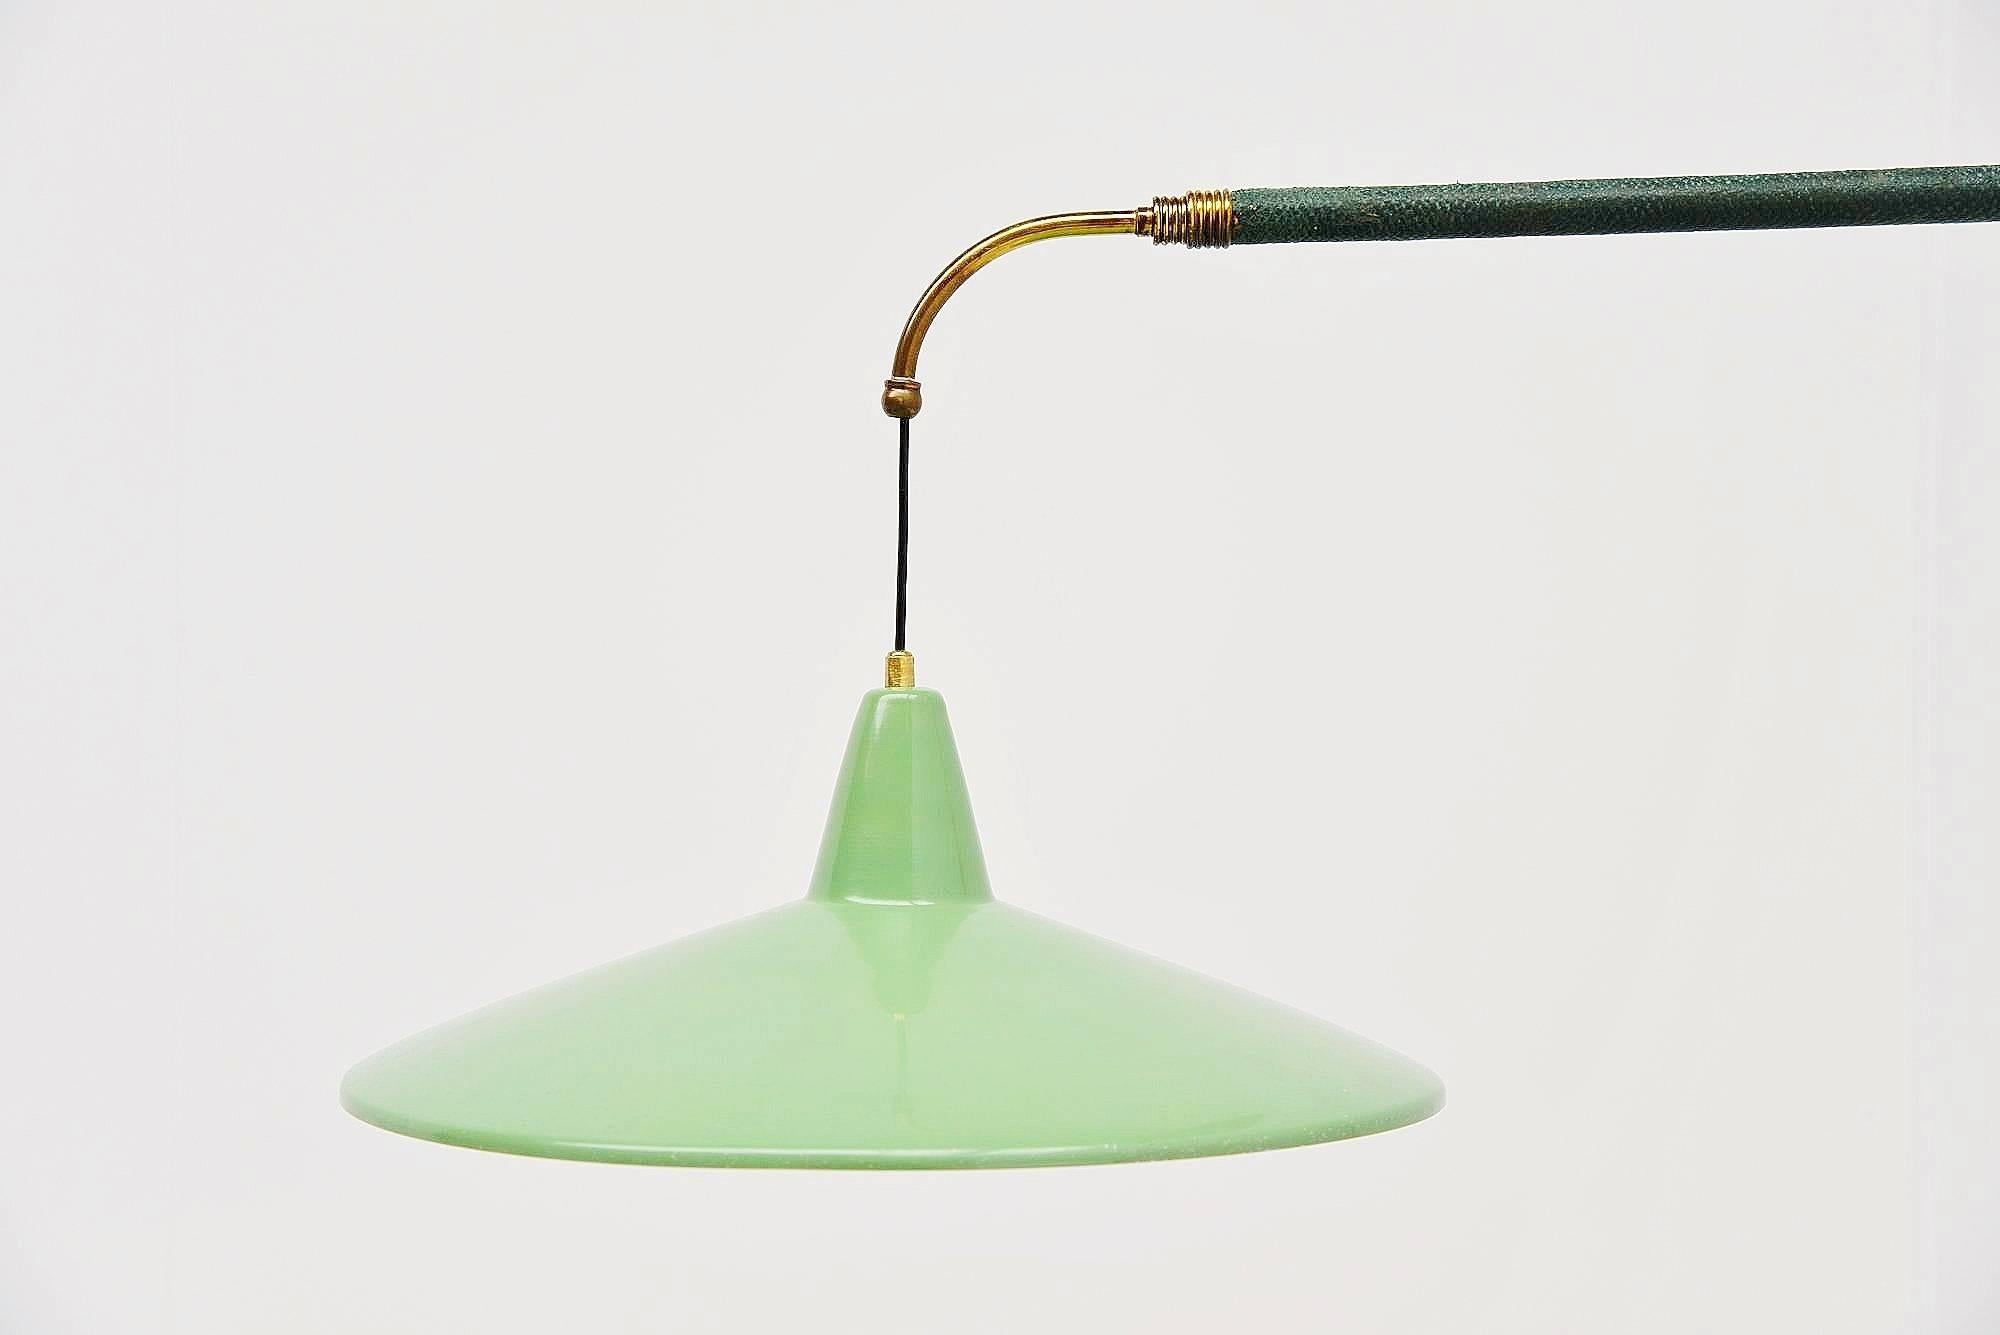 Very nice extendable wall lamp in the style of Arredoluce, Italy 1950. High quality wall lamp with brass extendable arm (extendable from 100 cm to 150 cm), covered with green leather. It has a brass weight and a very nice mint green shade. The lamp